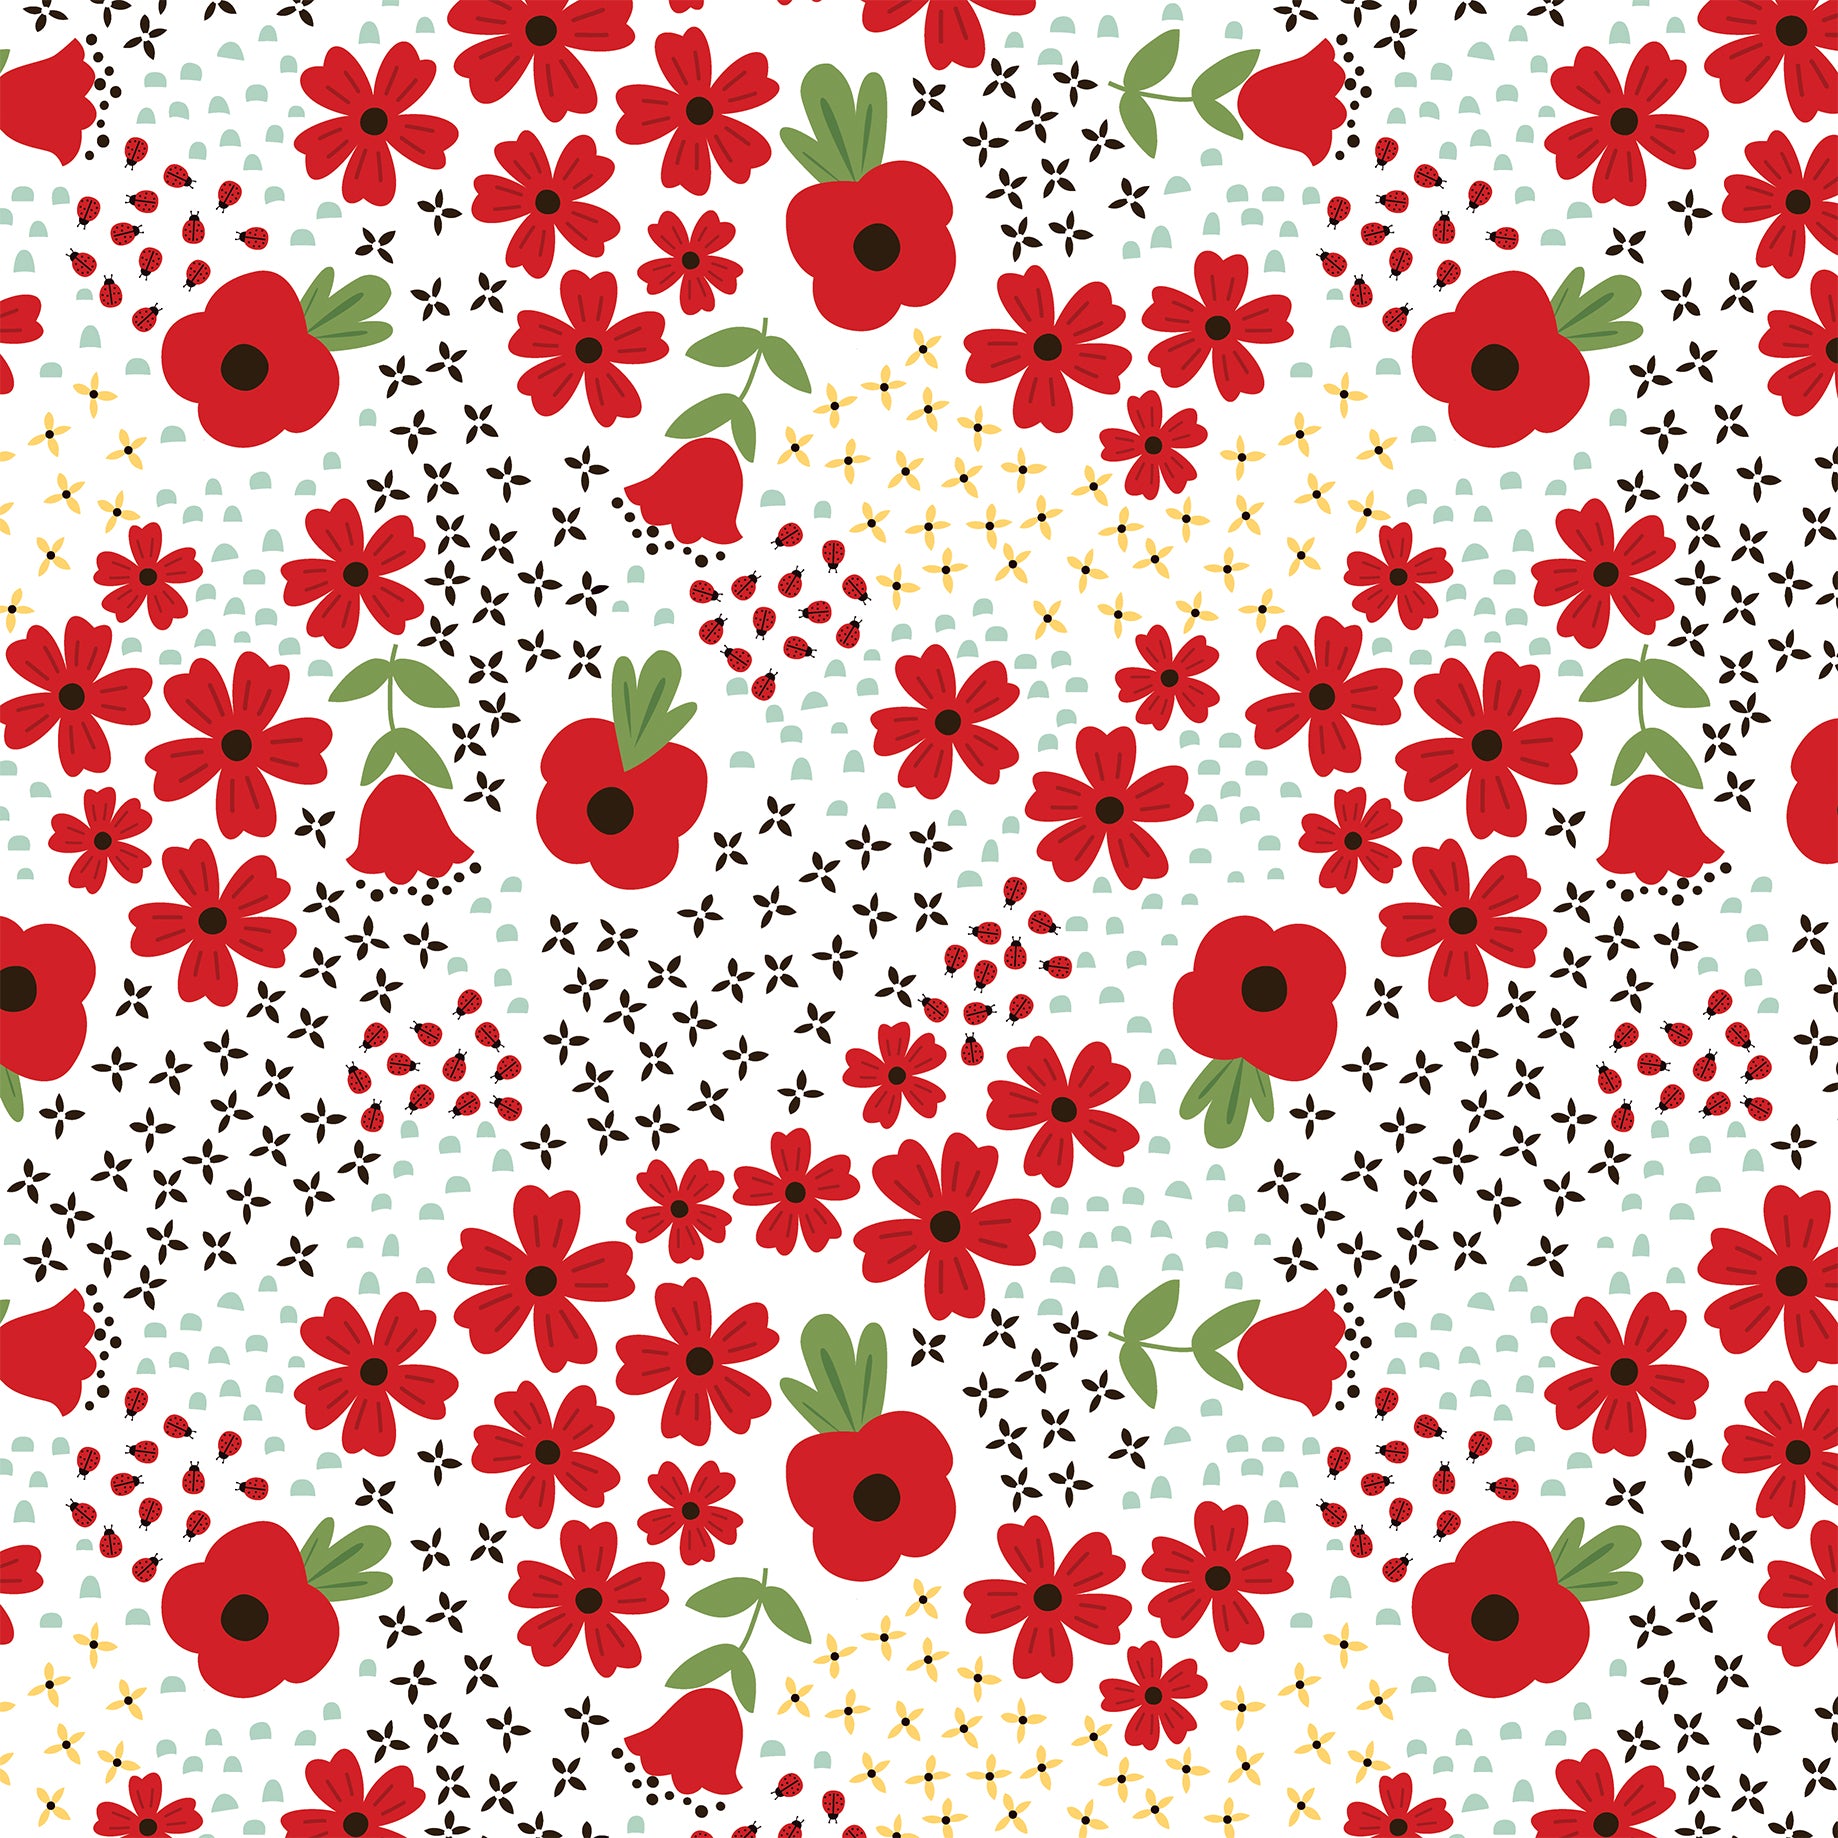 Little Ladybug Collection Ladybug Garden 12 x 12 Double-Sided Scrapbook Paper by Echo Park Paper